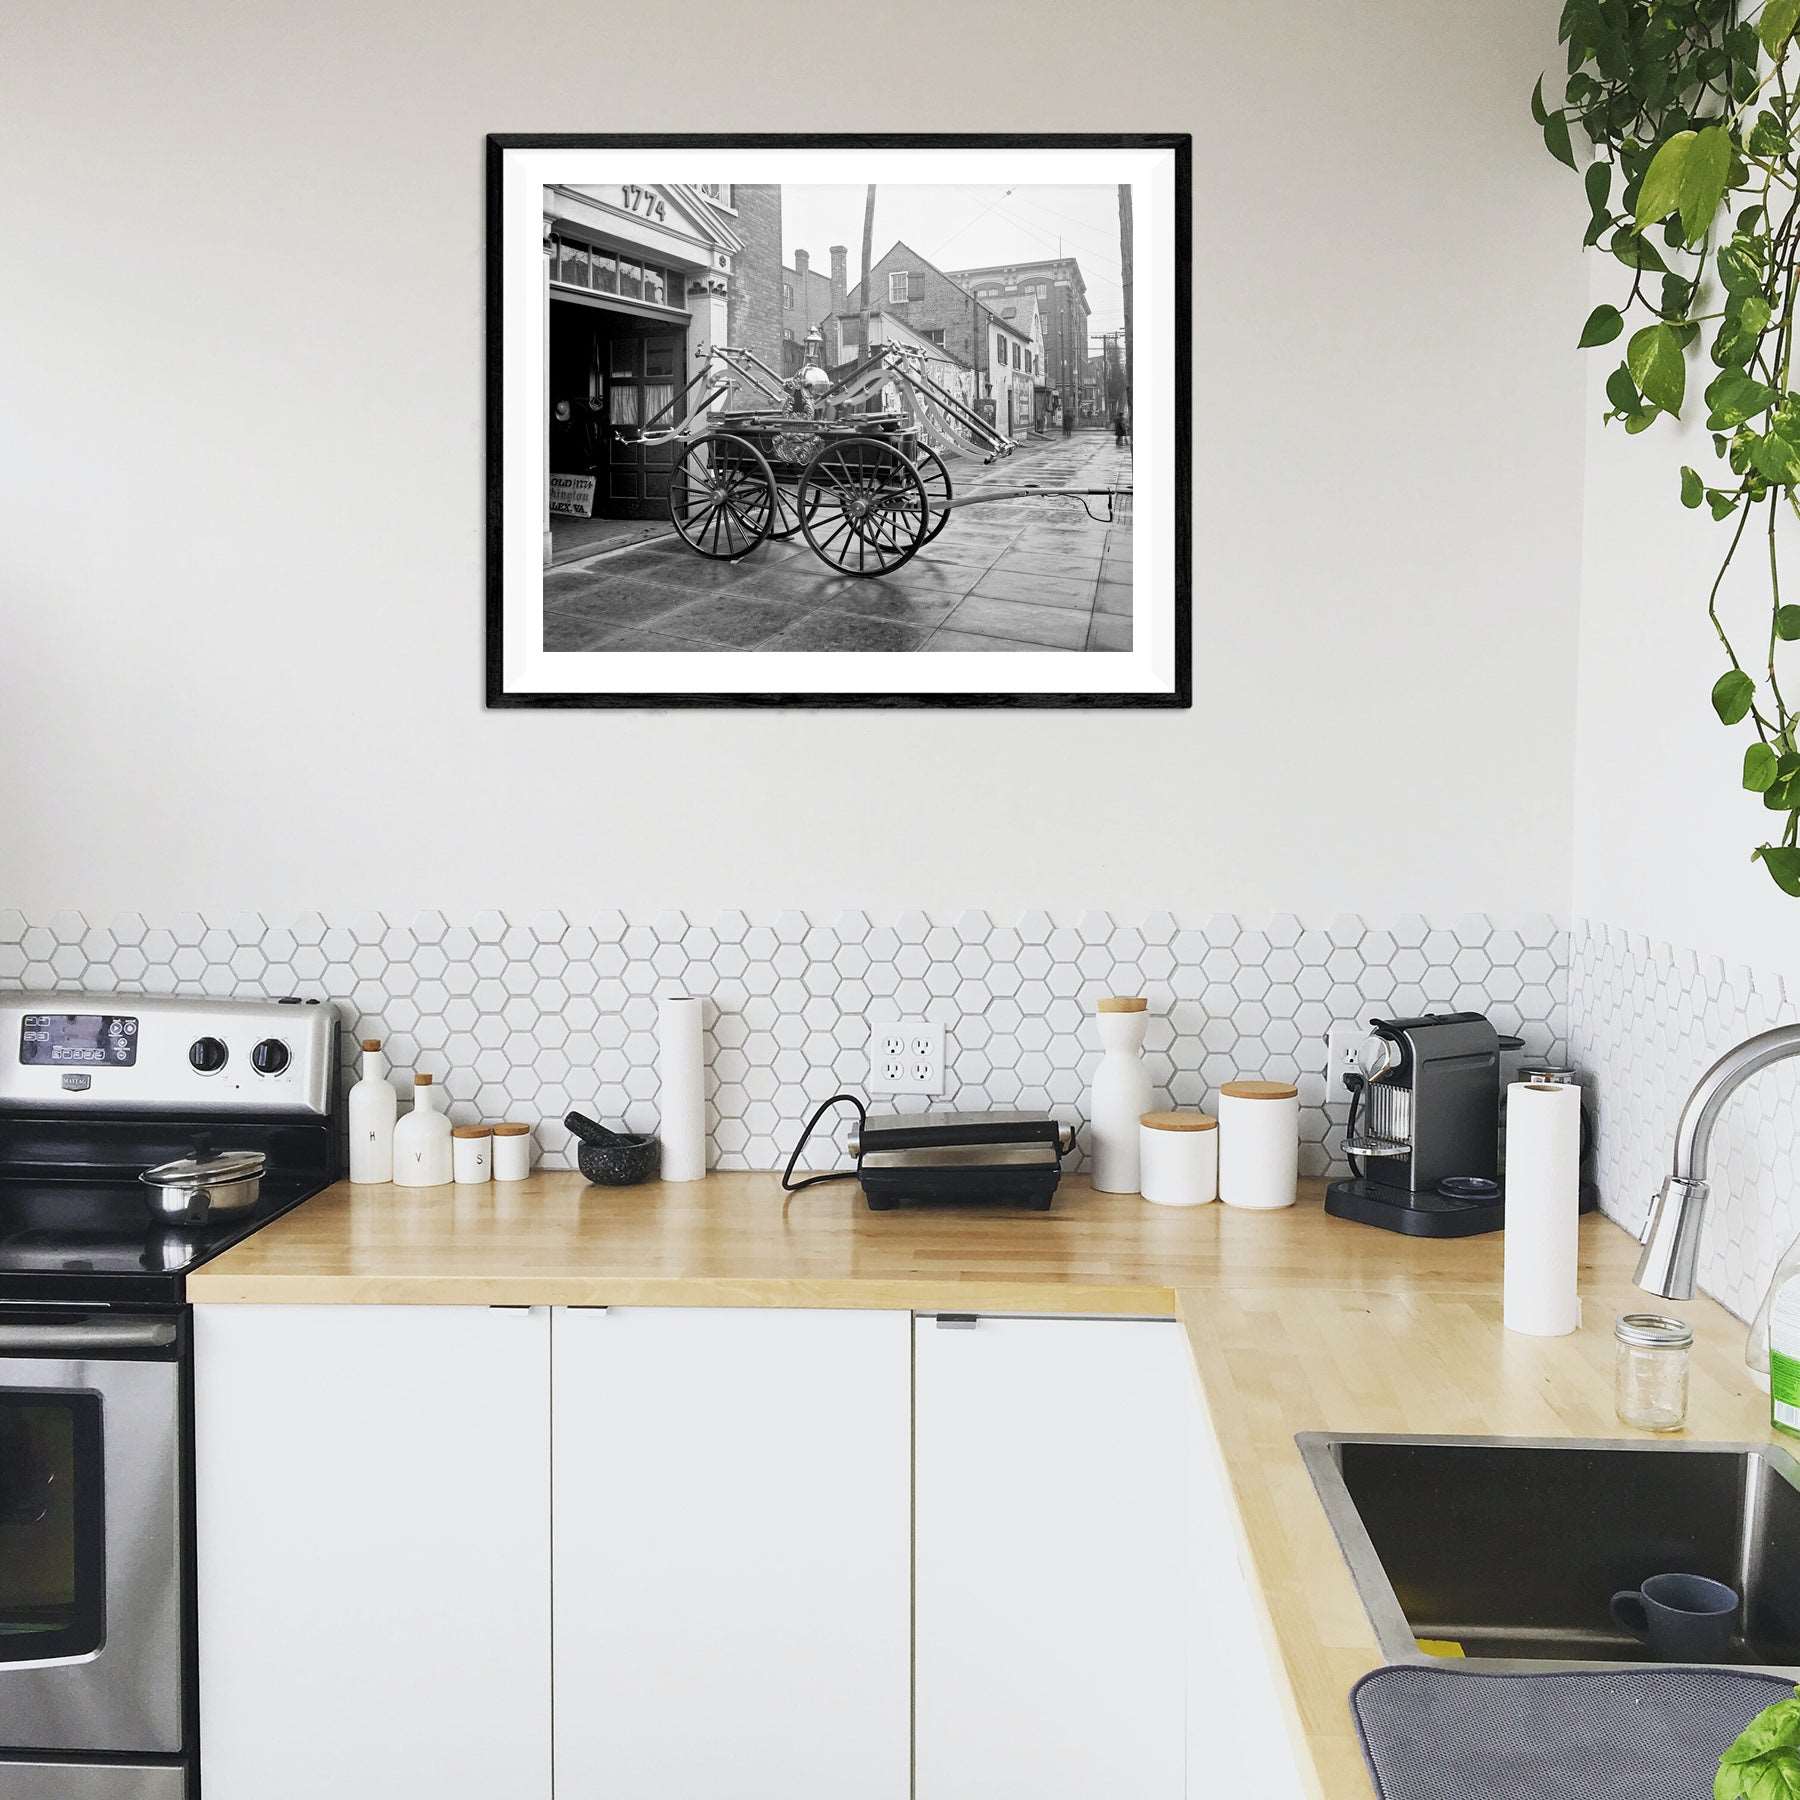 A kitchen with a framed print of a photograph of a vintage fire engine in Alexandria